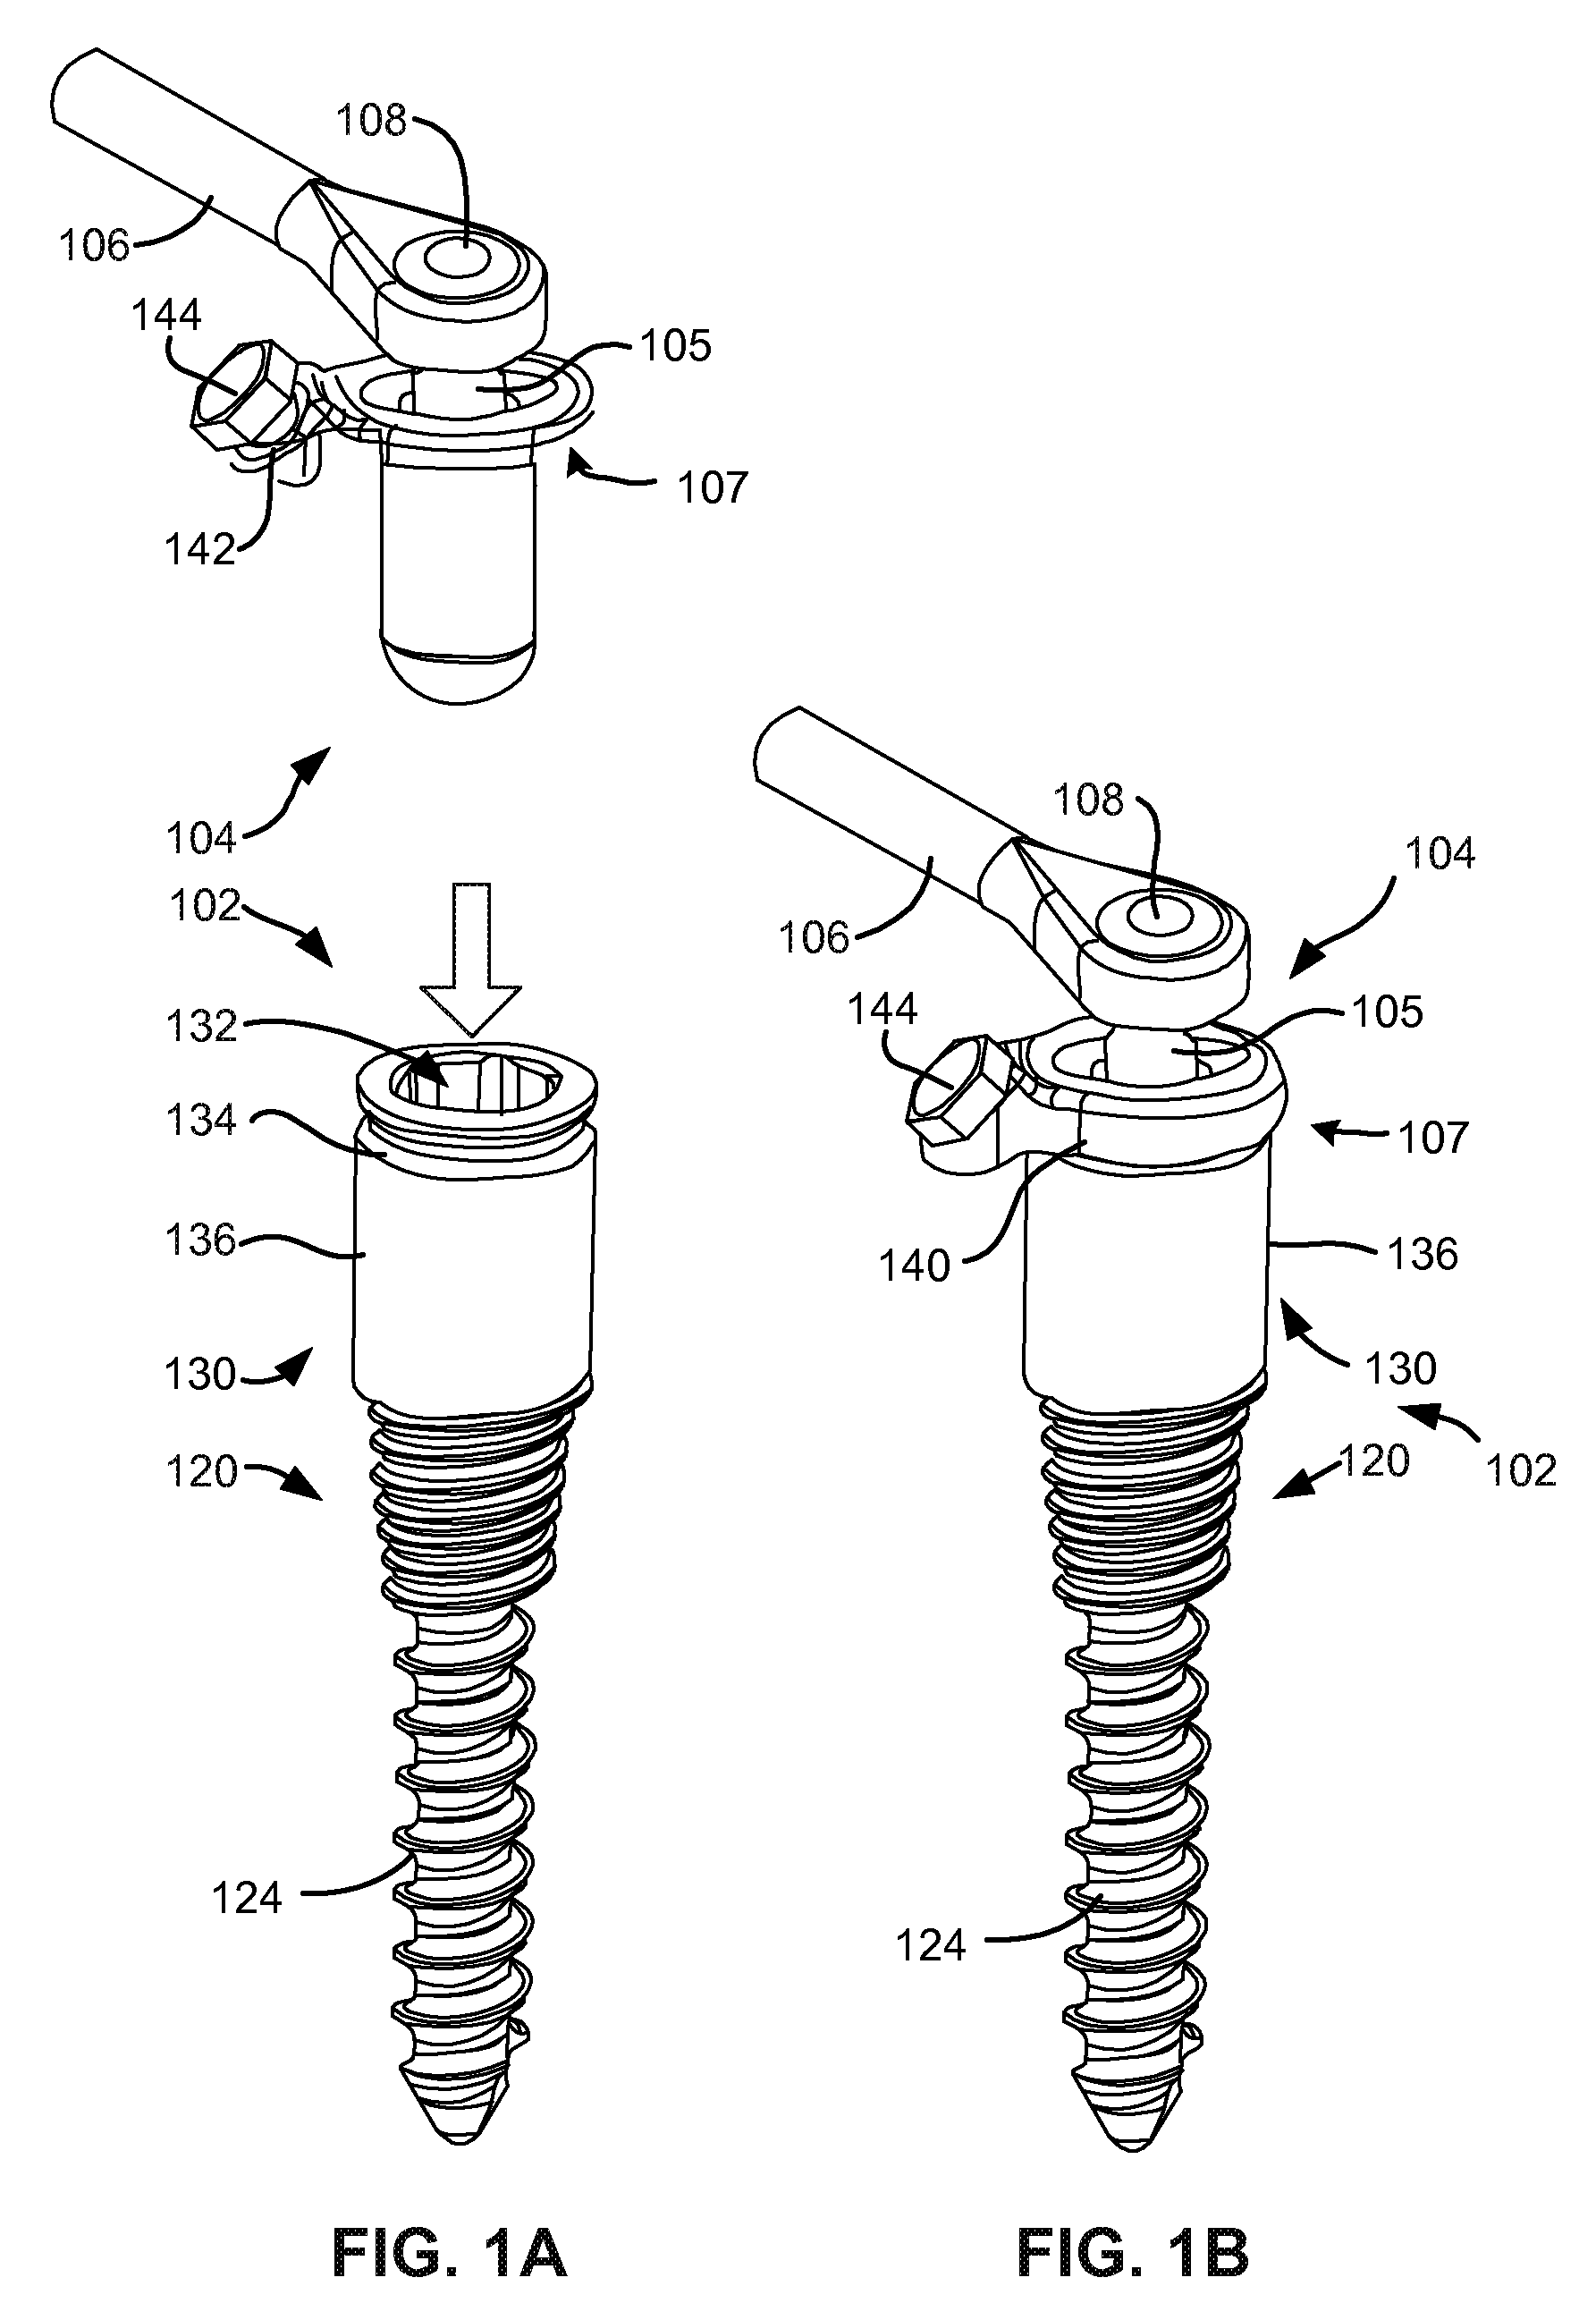 Load-sharing component having a deflectable post and centering spring and method for dynamic stabilization of the spine